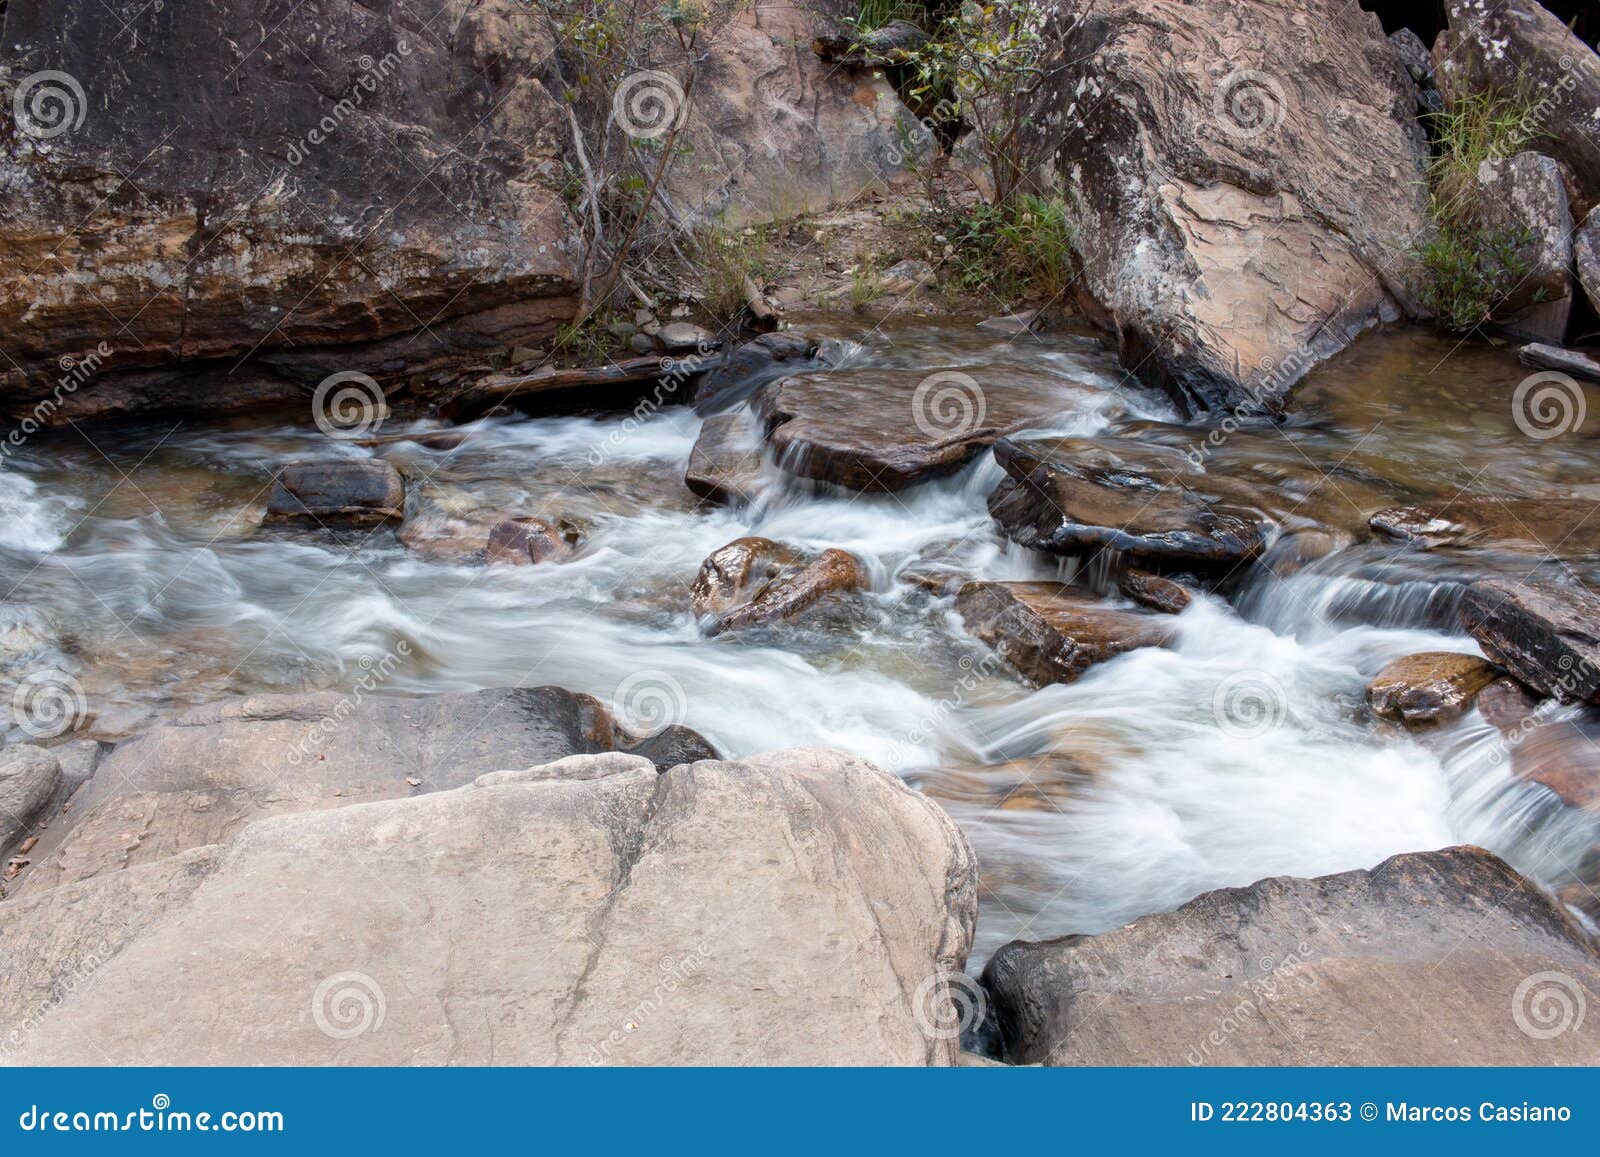 water rushing down the small river at waterfall old mill or chachoeira da usina velha